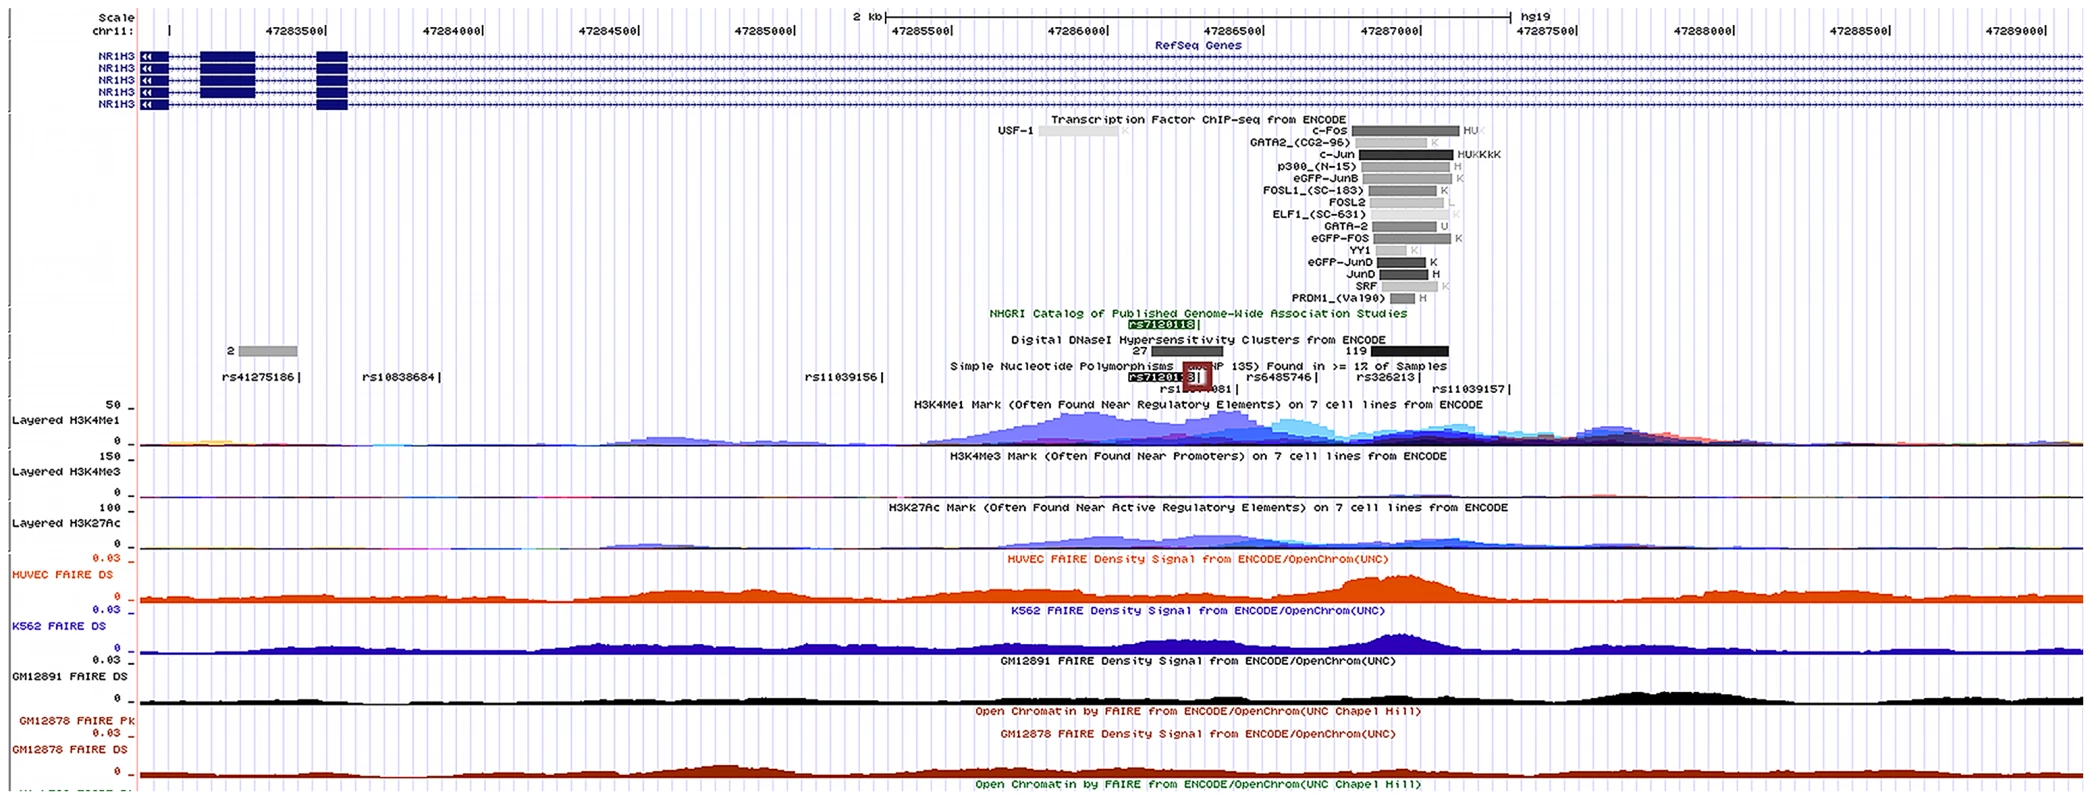 UCSC Genome Browser Annotation of rs7120118 Locus on Human Mar. 2009 (NCBI37/hg19) Assembly.